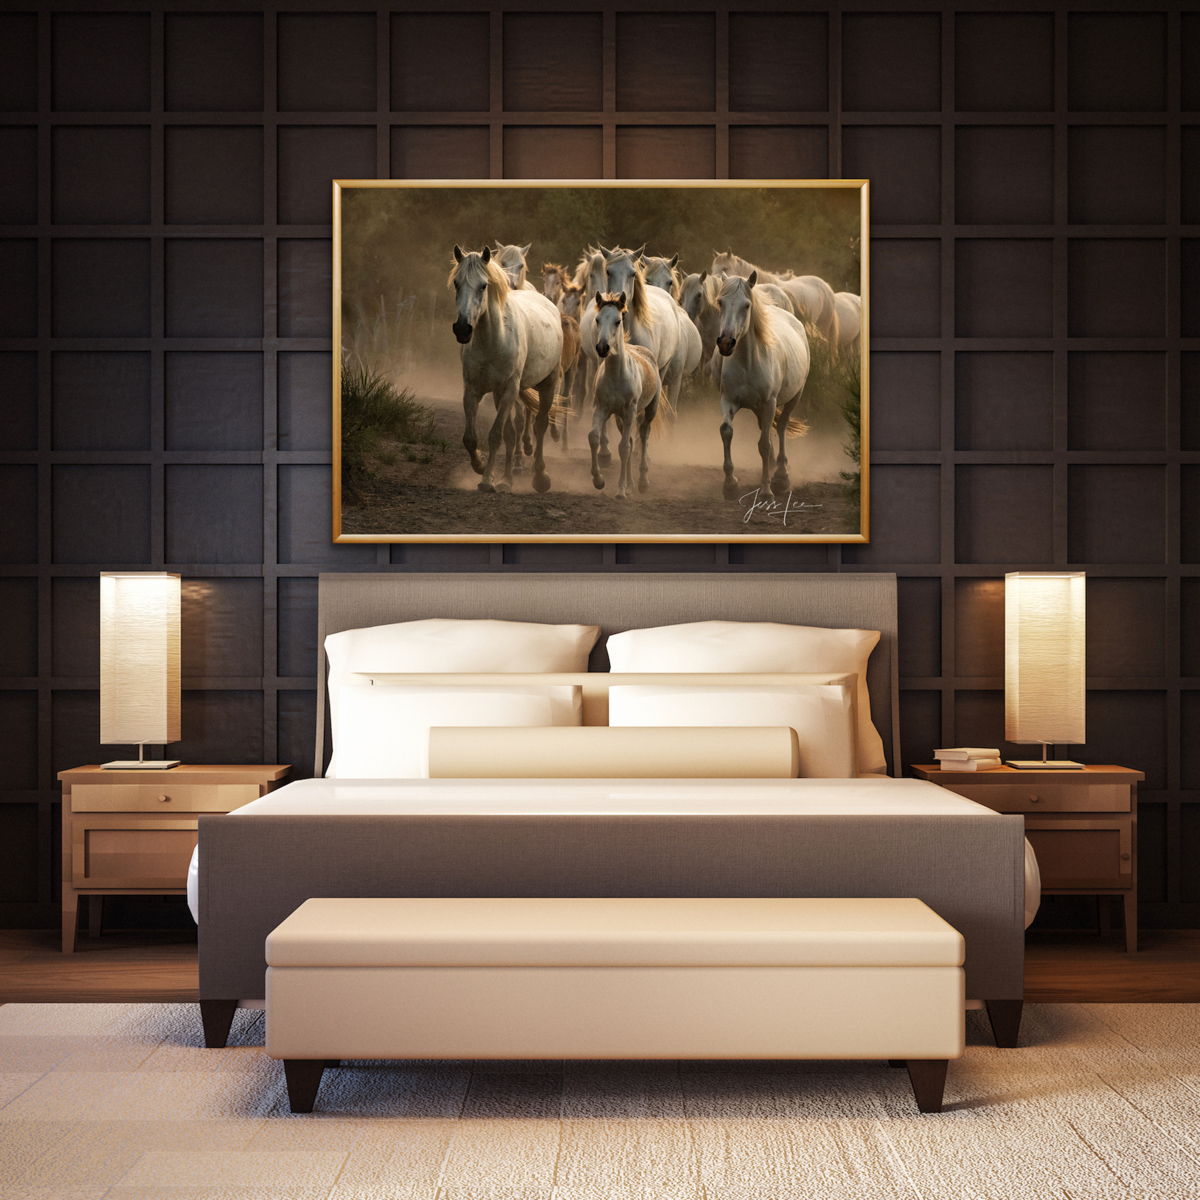 Horse Photography Prints. Pictures available as an Acrylic, Metal, Canvas, or Fine Art Paper limited edition wall art prints.